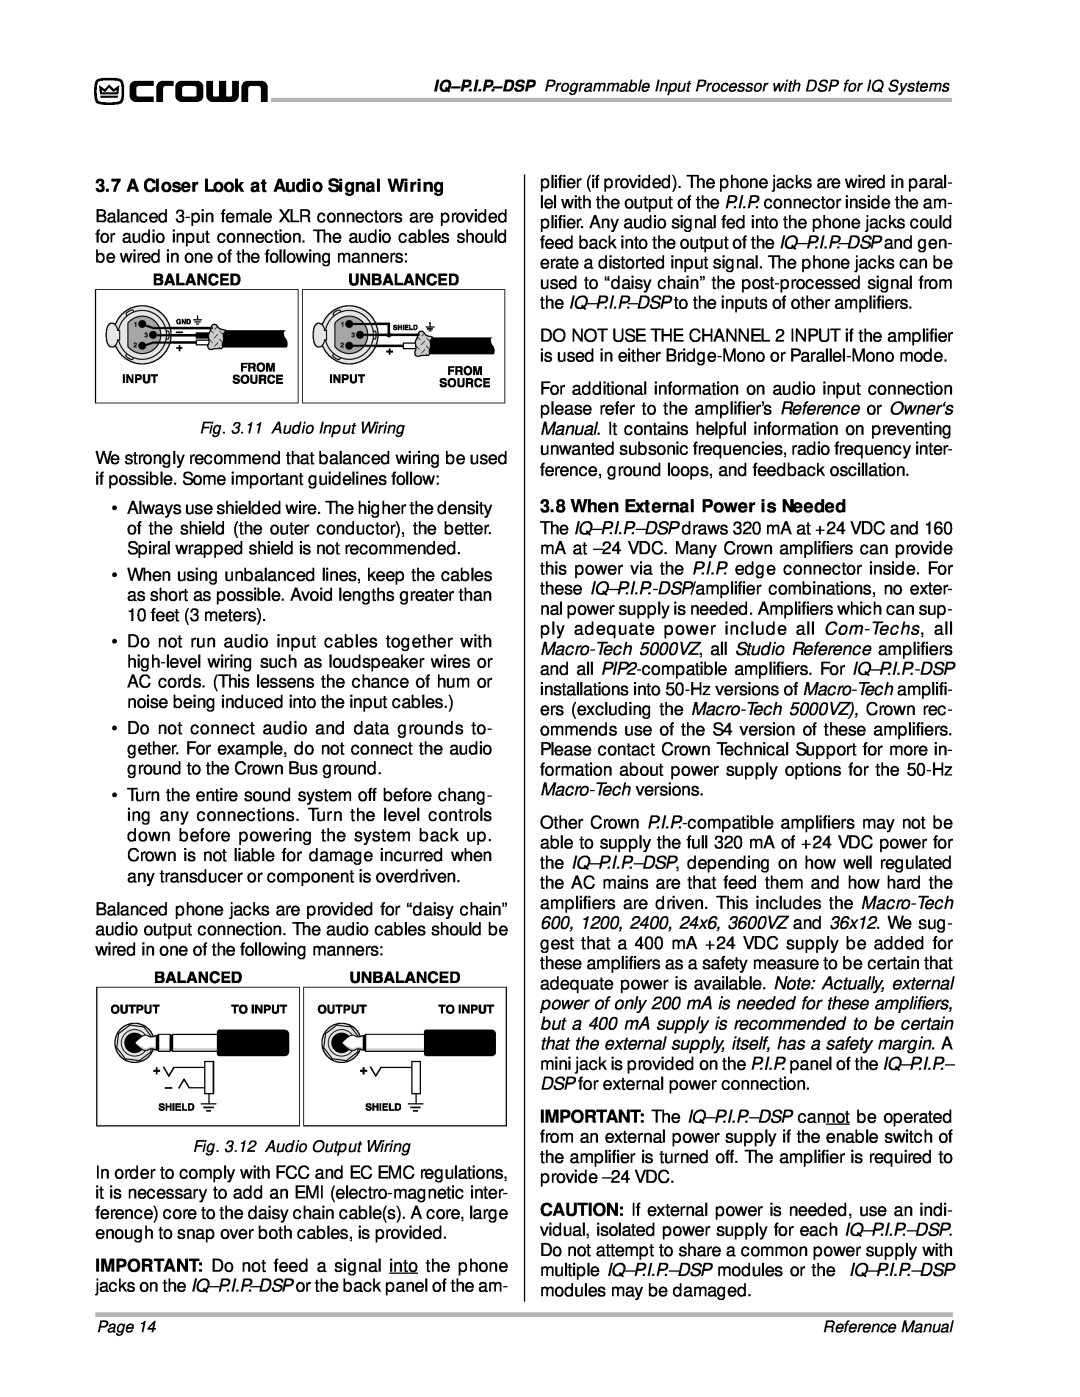 Crown Audio IQ P.I.P.-DSP A Closer Look at Audio Signal Wiring, When External Power is Needed, 11 Audio Input Wiring, Page 